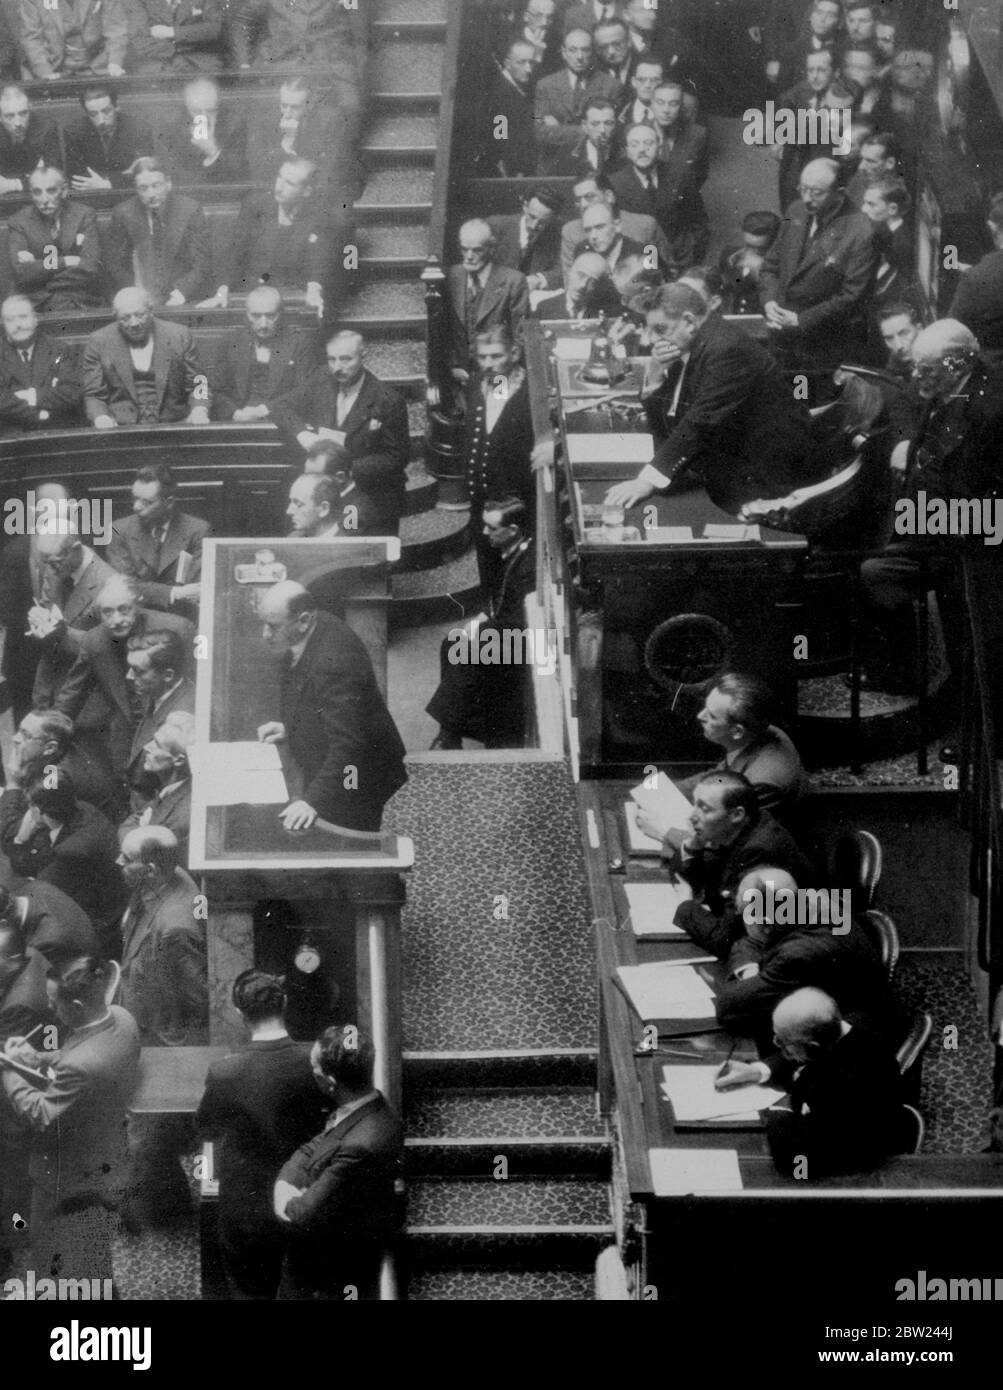 Mr Edouard Daladier, the French premiere, was given an overwhelming vote of confidence by the chamber of deputies following the debate on the Munich agreement on the Czech-German dispute. M Daladier said: I regret nothing. We choose peace. Photo shows: Edouard Daladier making his speech to the chamber. Behind him is M Edouard Herriot, the president. 5 October 1938 Stock Photo